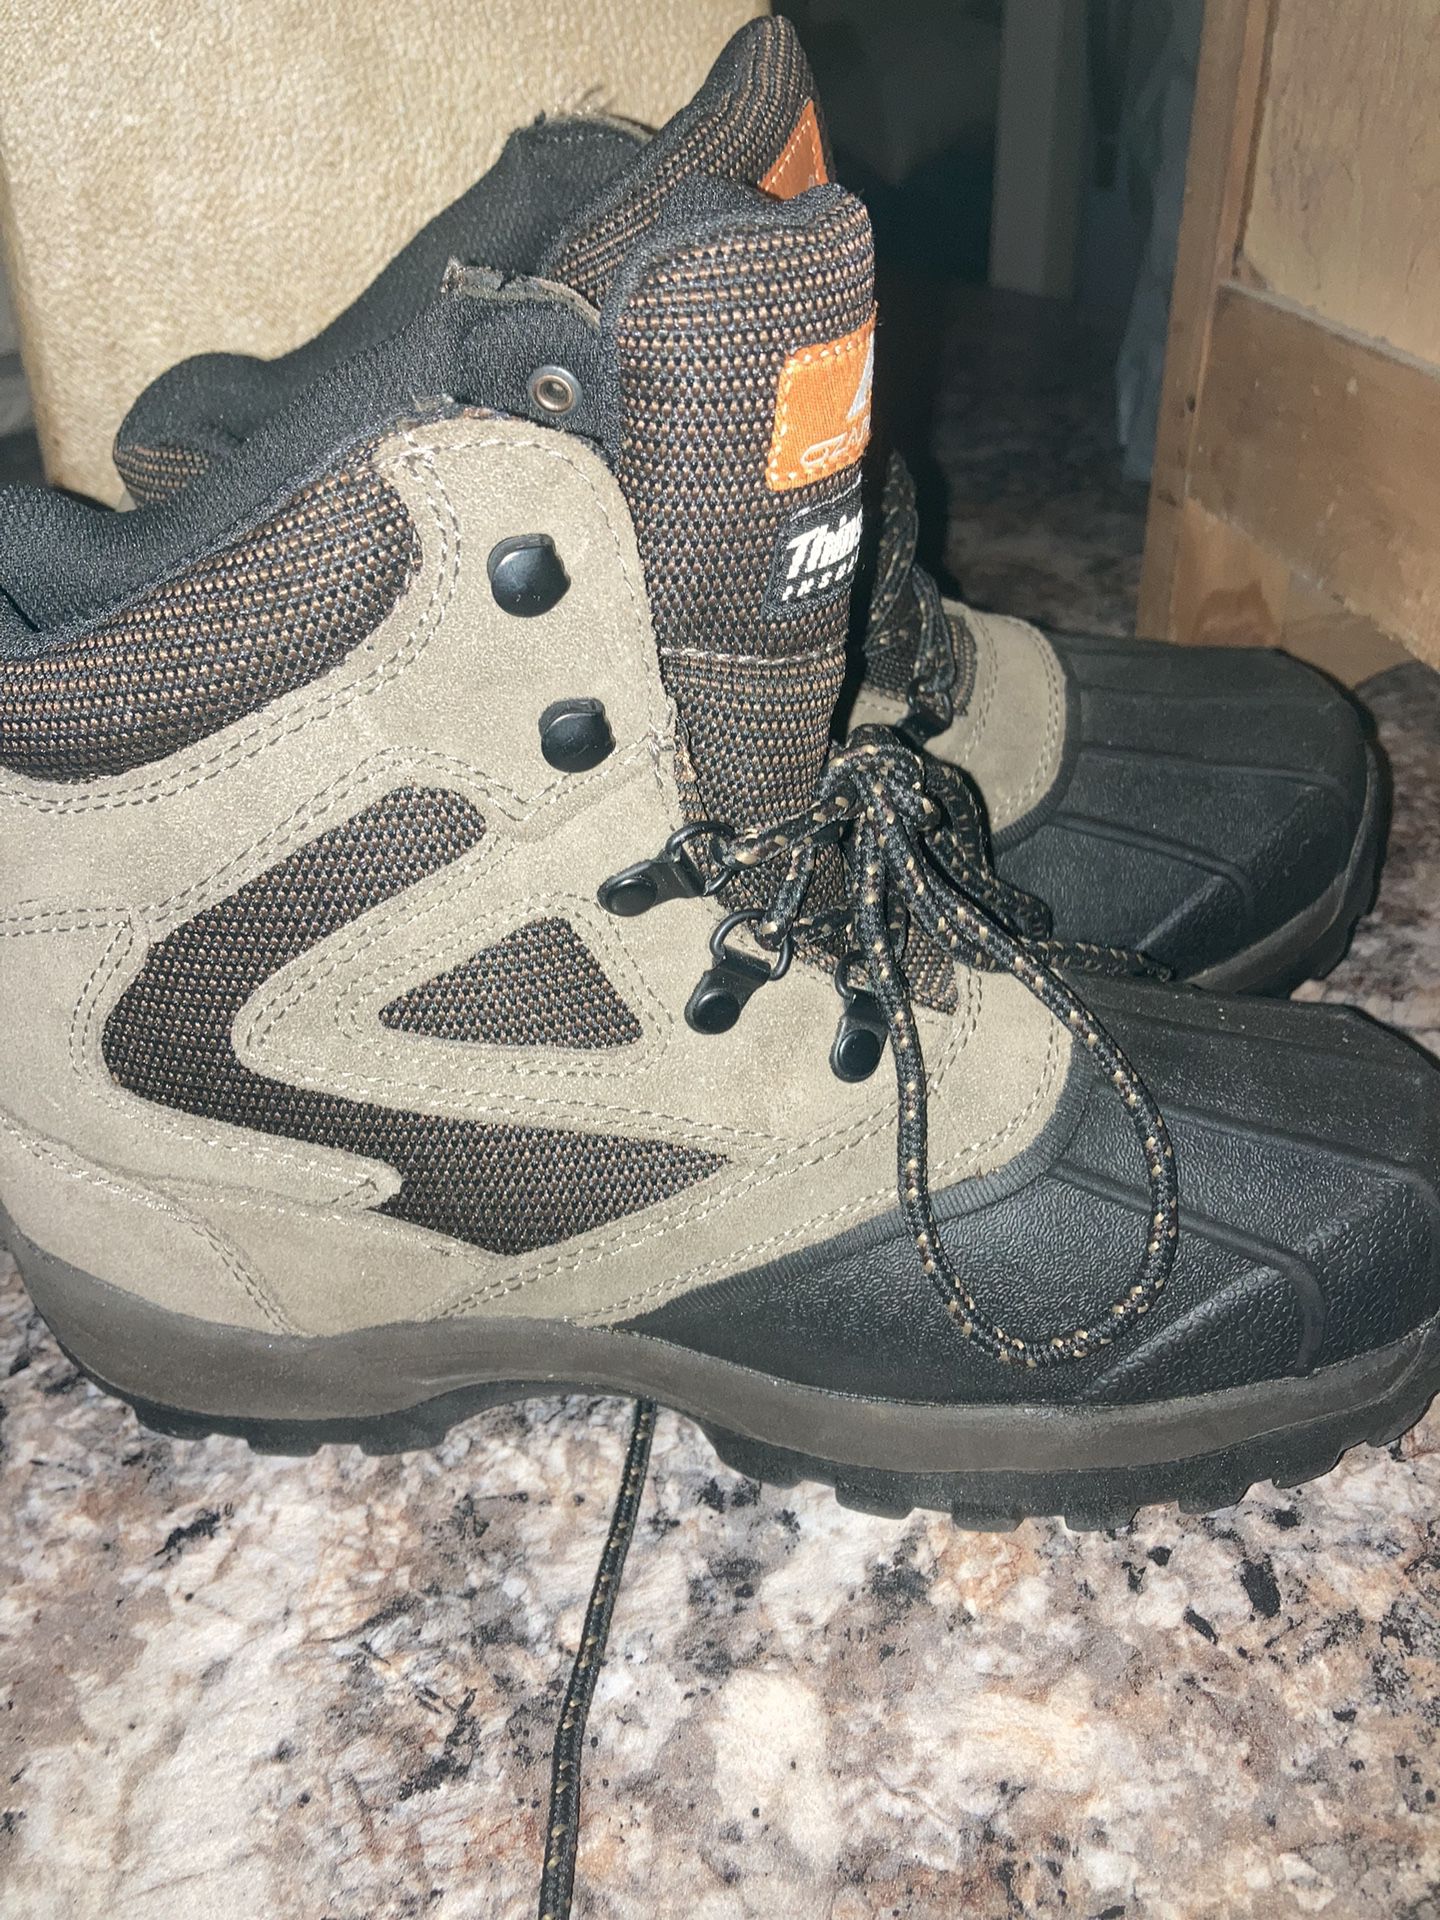 Hiking, Snow, Winter Or Work Boots